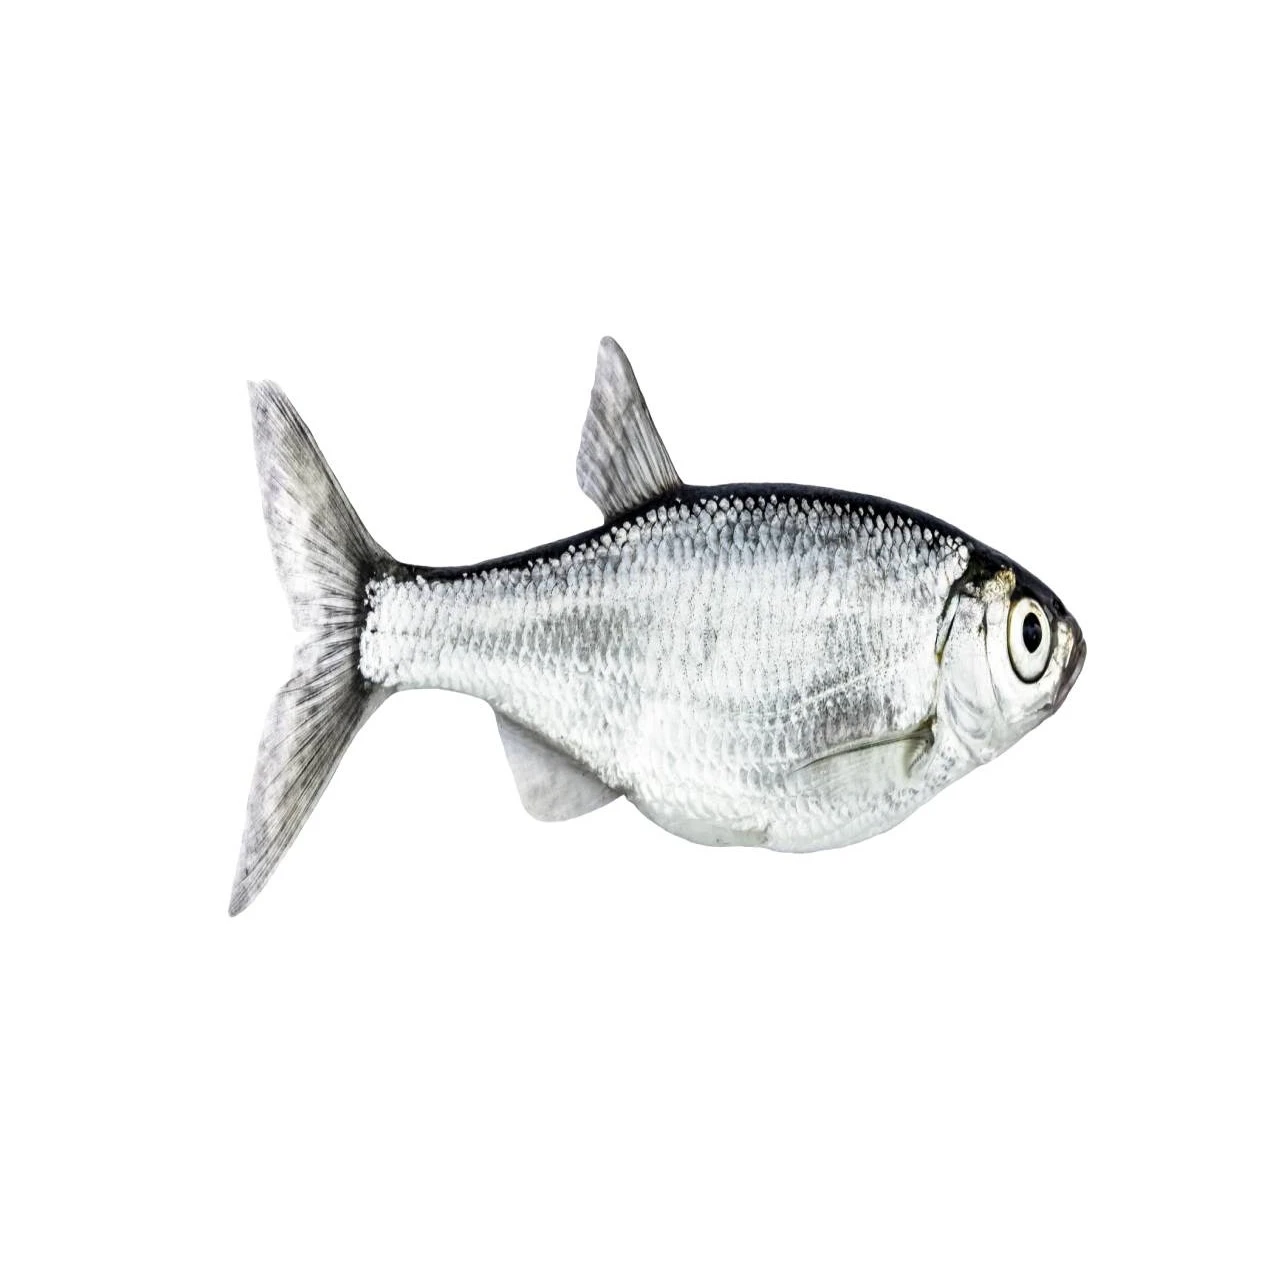 Different types of natural fish from manufacturer